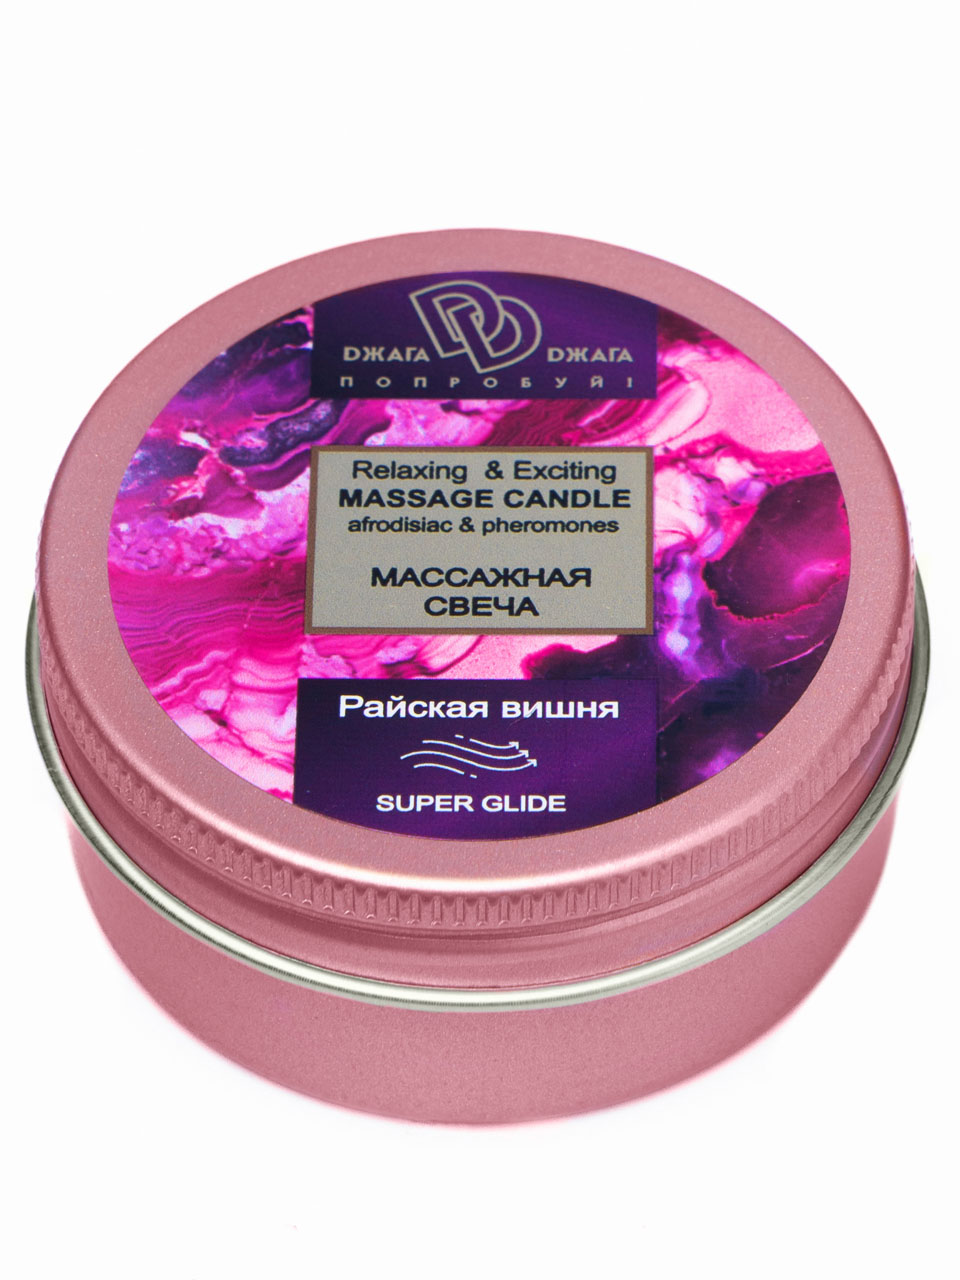   Relaxing & Exciting Massage Candle   2 .  15 